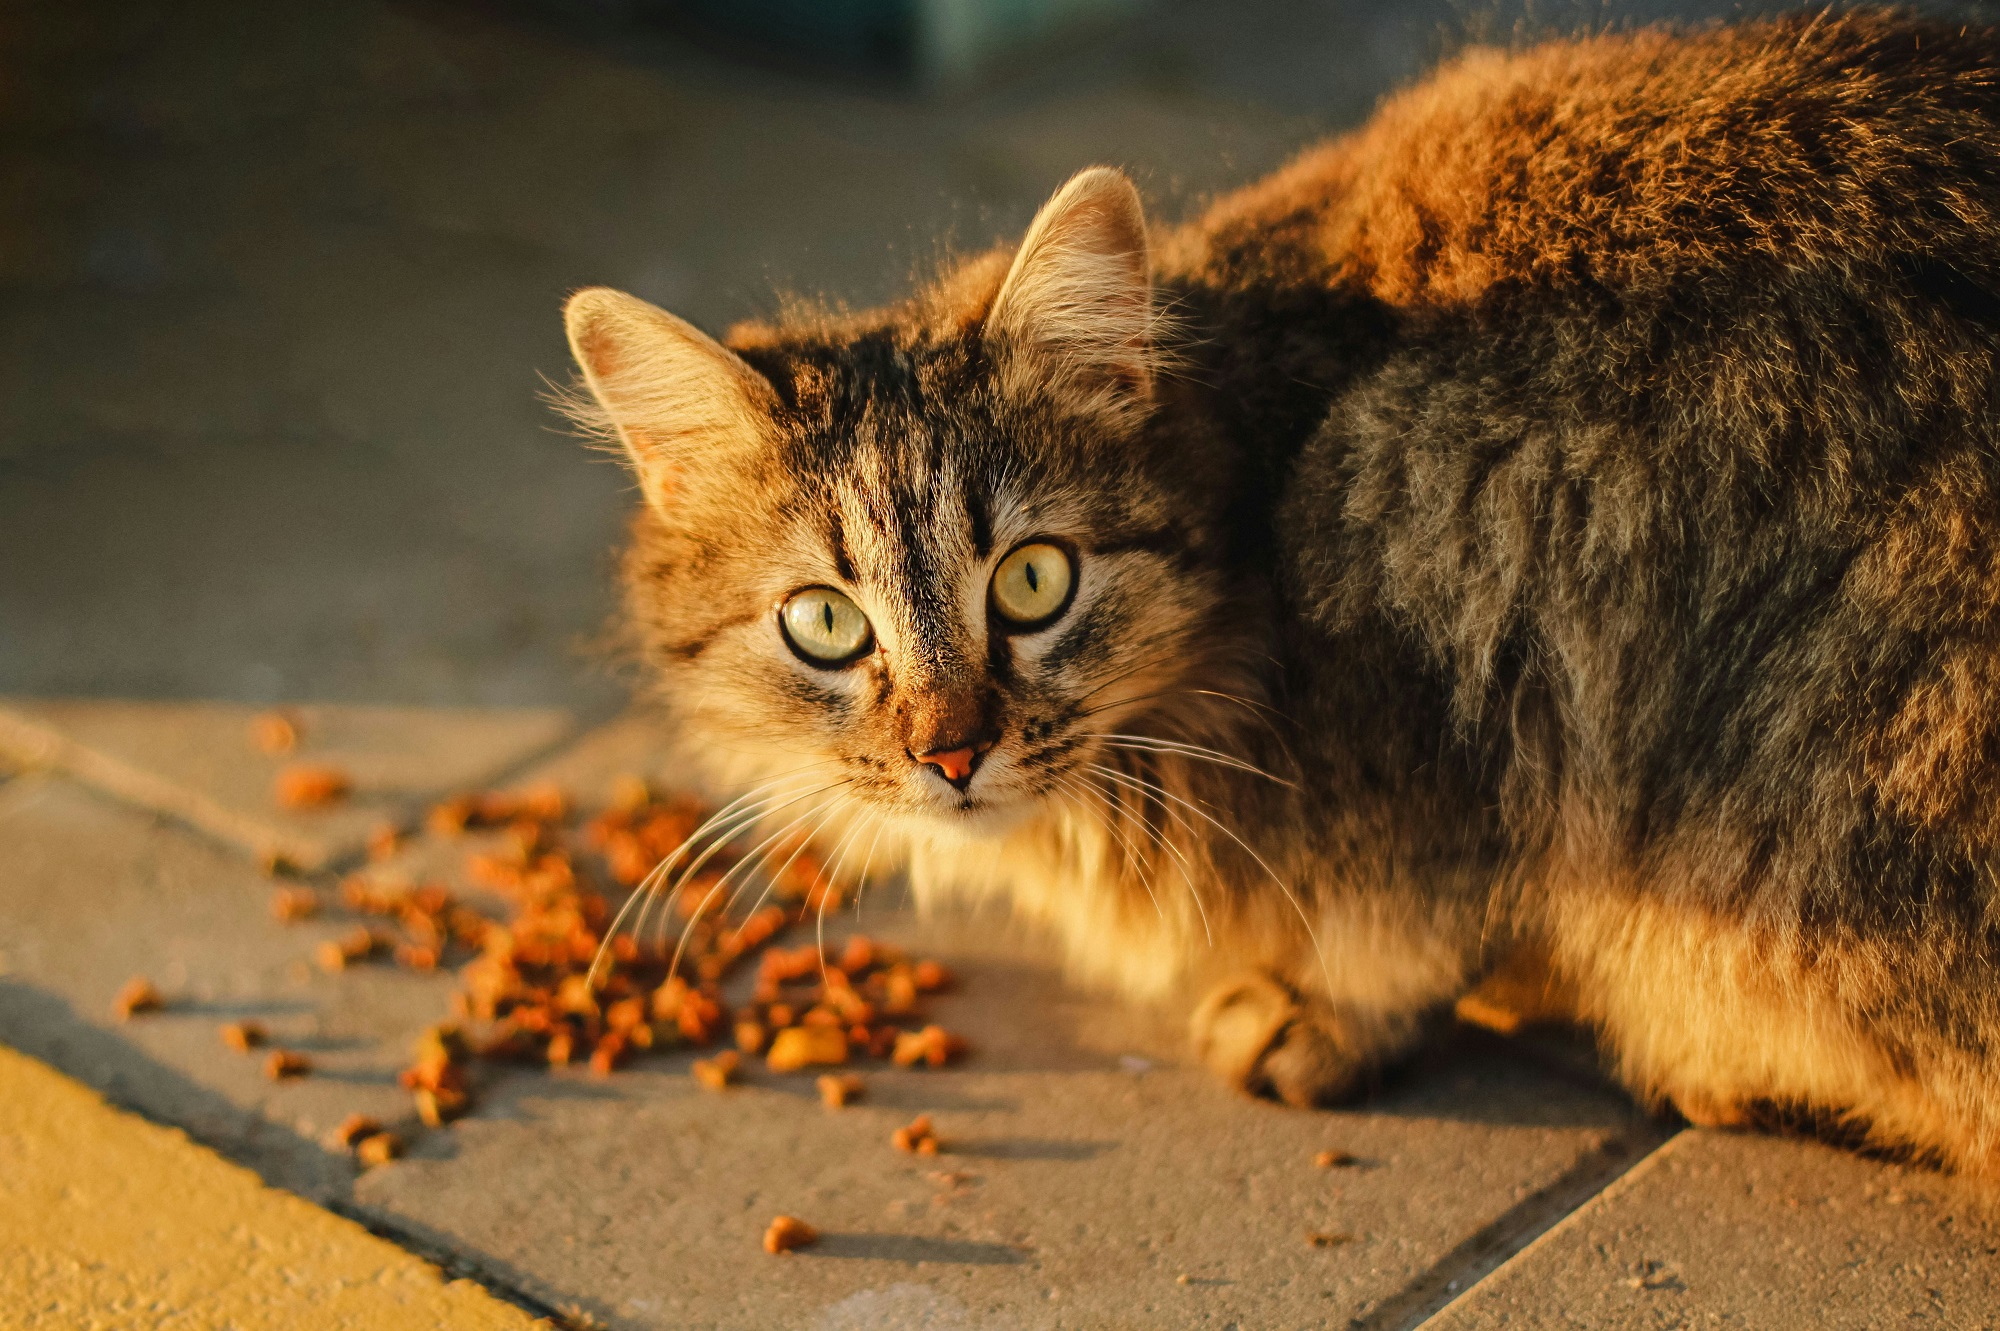 “Sourcing and Sustainability: Smalls’ Commitment to Ethical Cat Food Production” write some key points for blog content